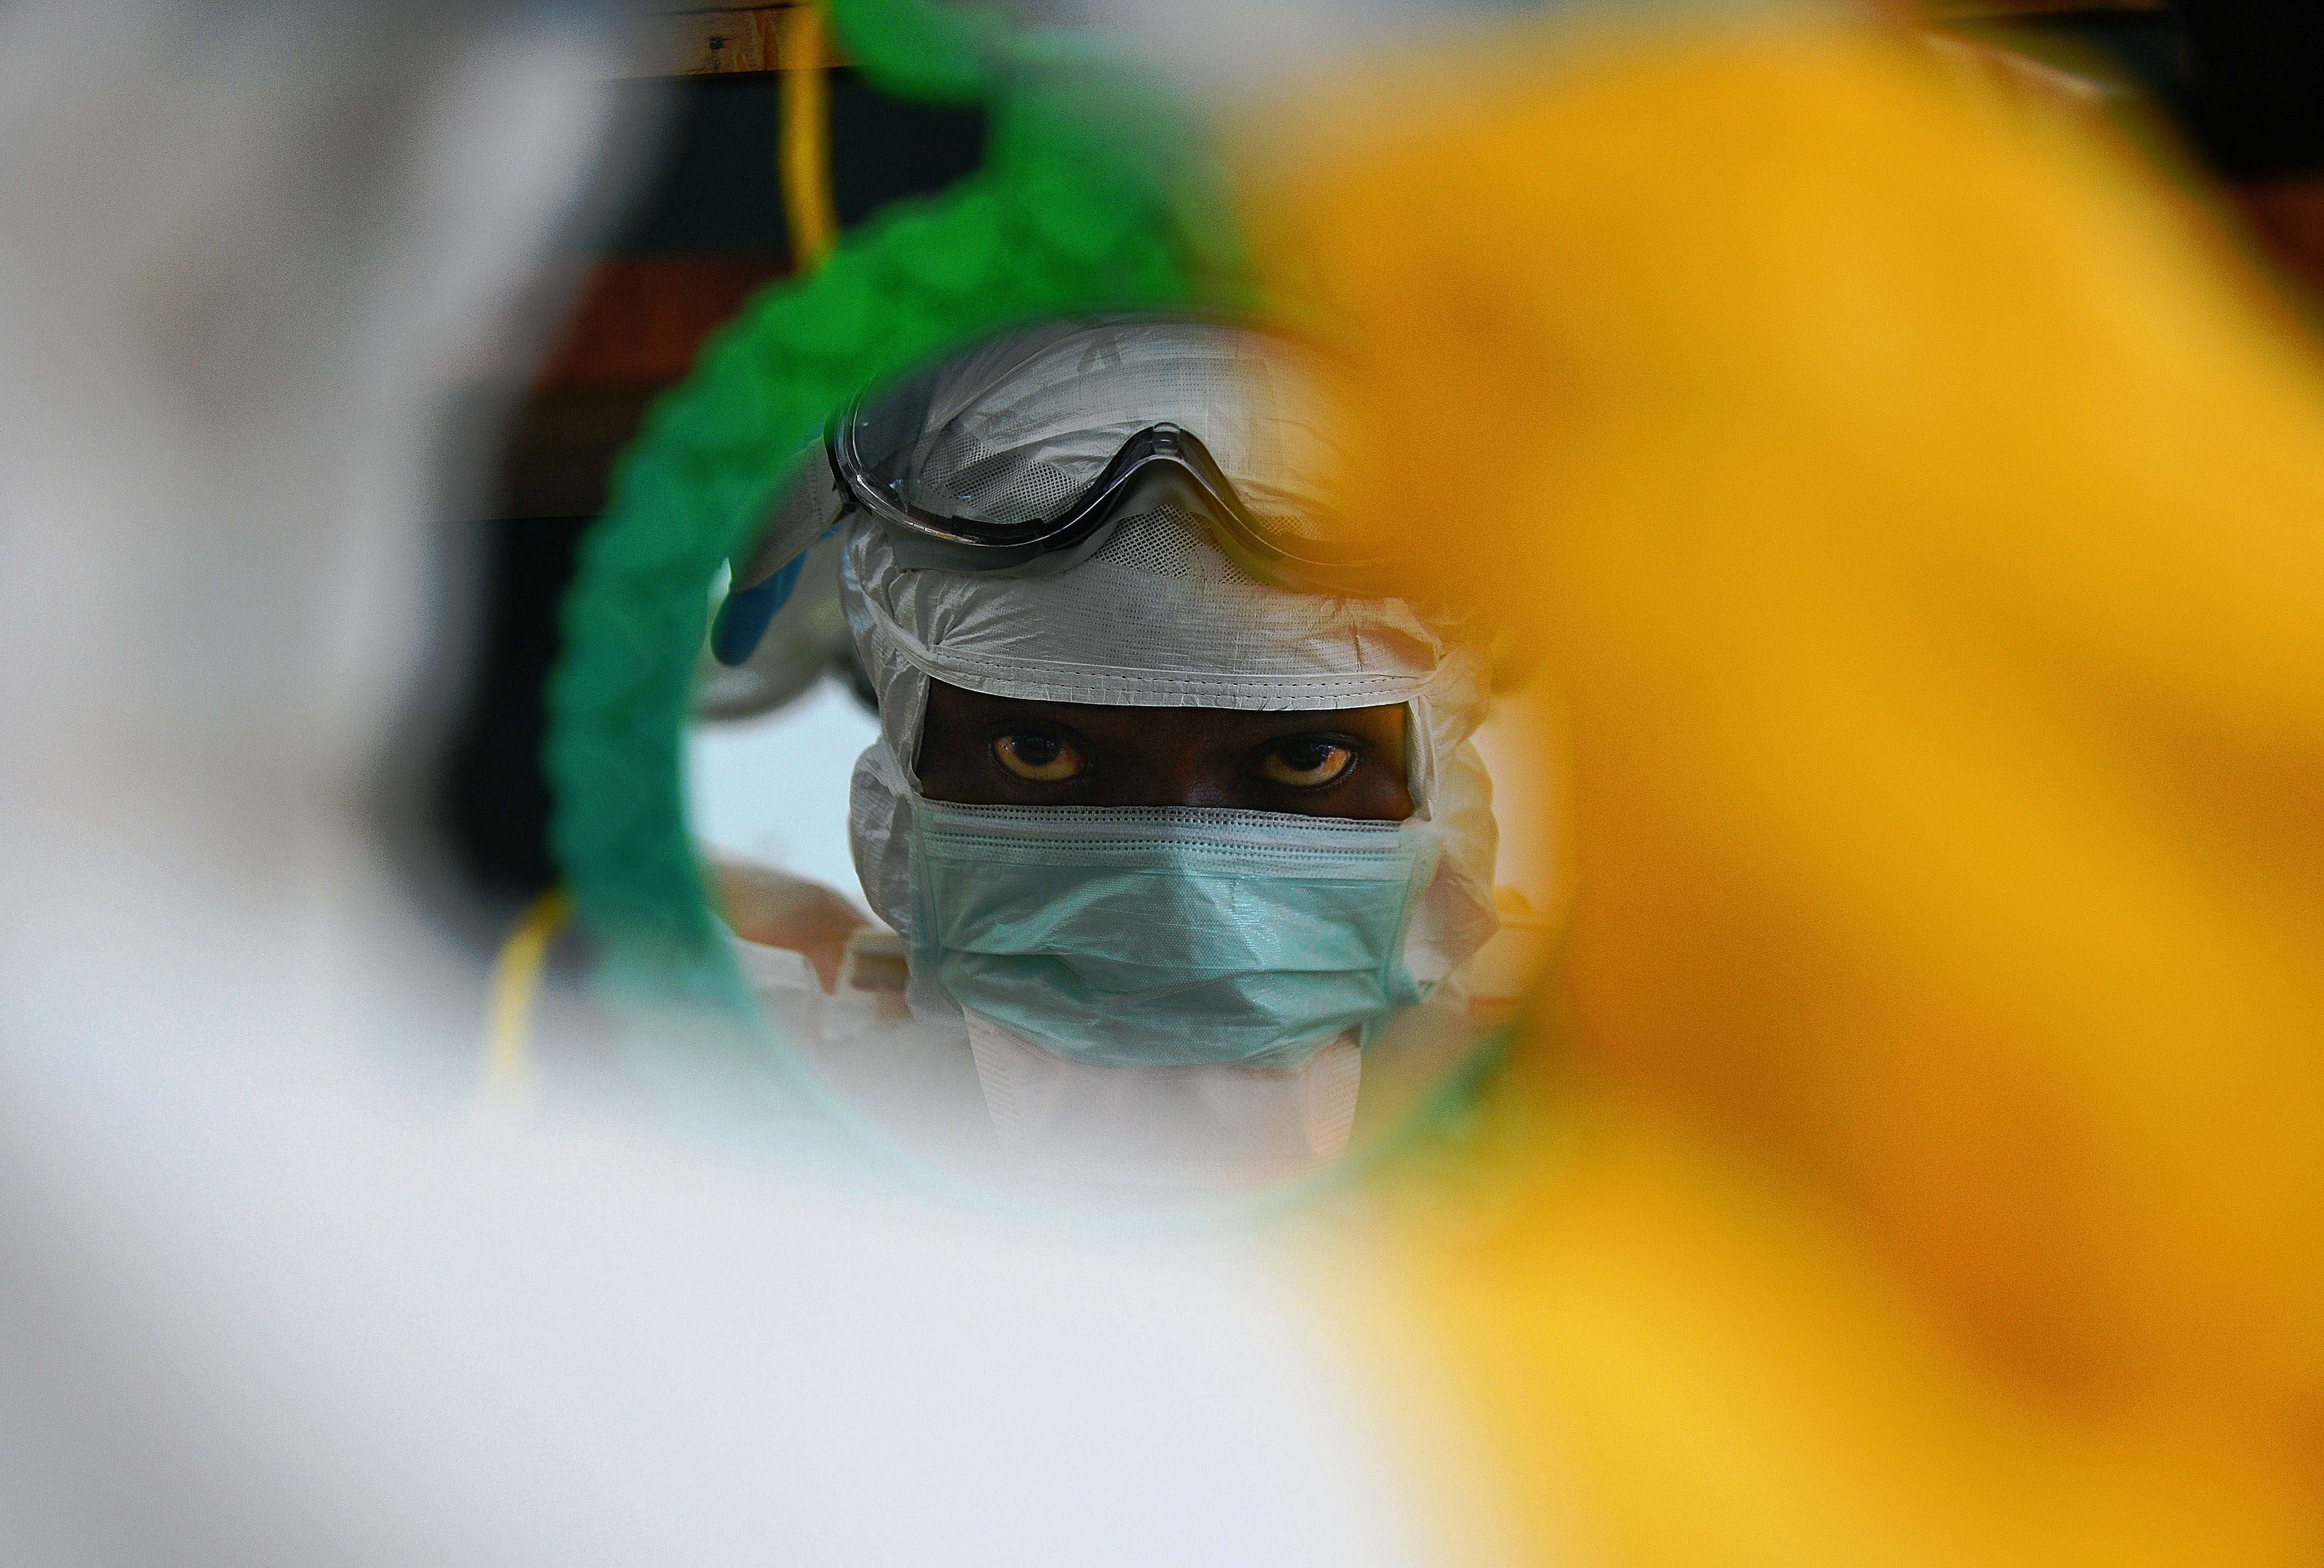 An MSF medical worker checks their protective clothing in a mirror at an MSF facility in Kailahun, Sierra Leone on August 15, 2014. (Carl De Souza—AFP/Getty Images)